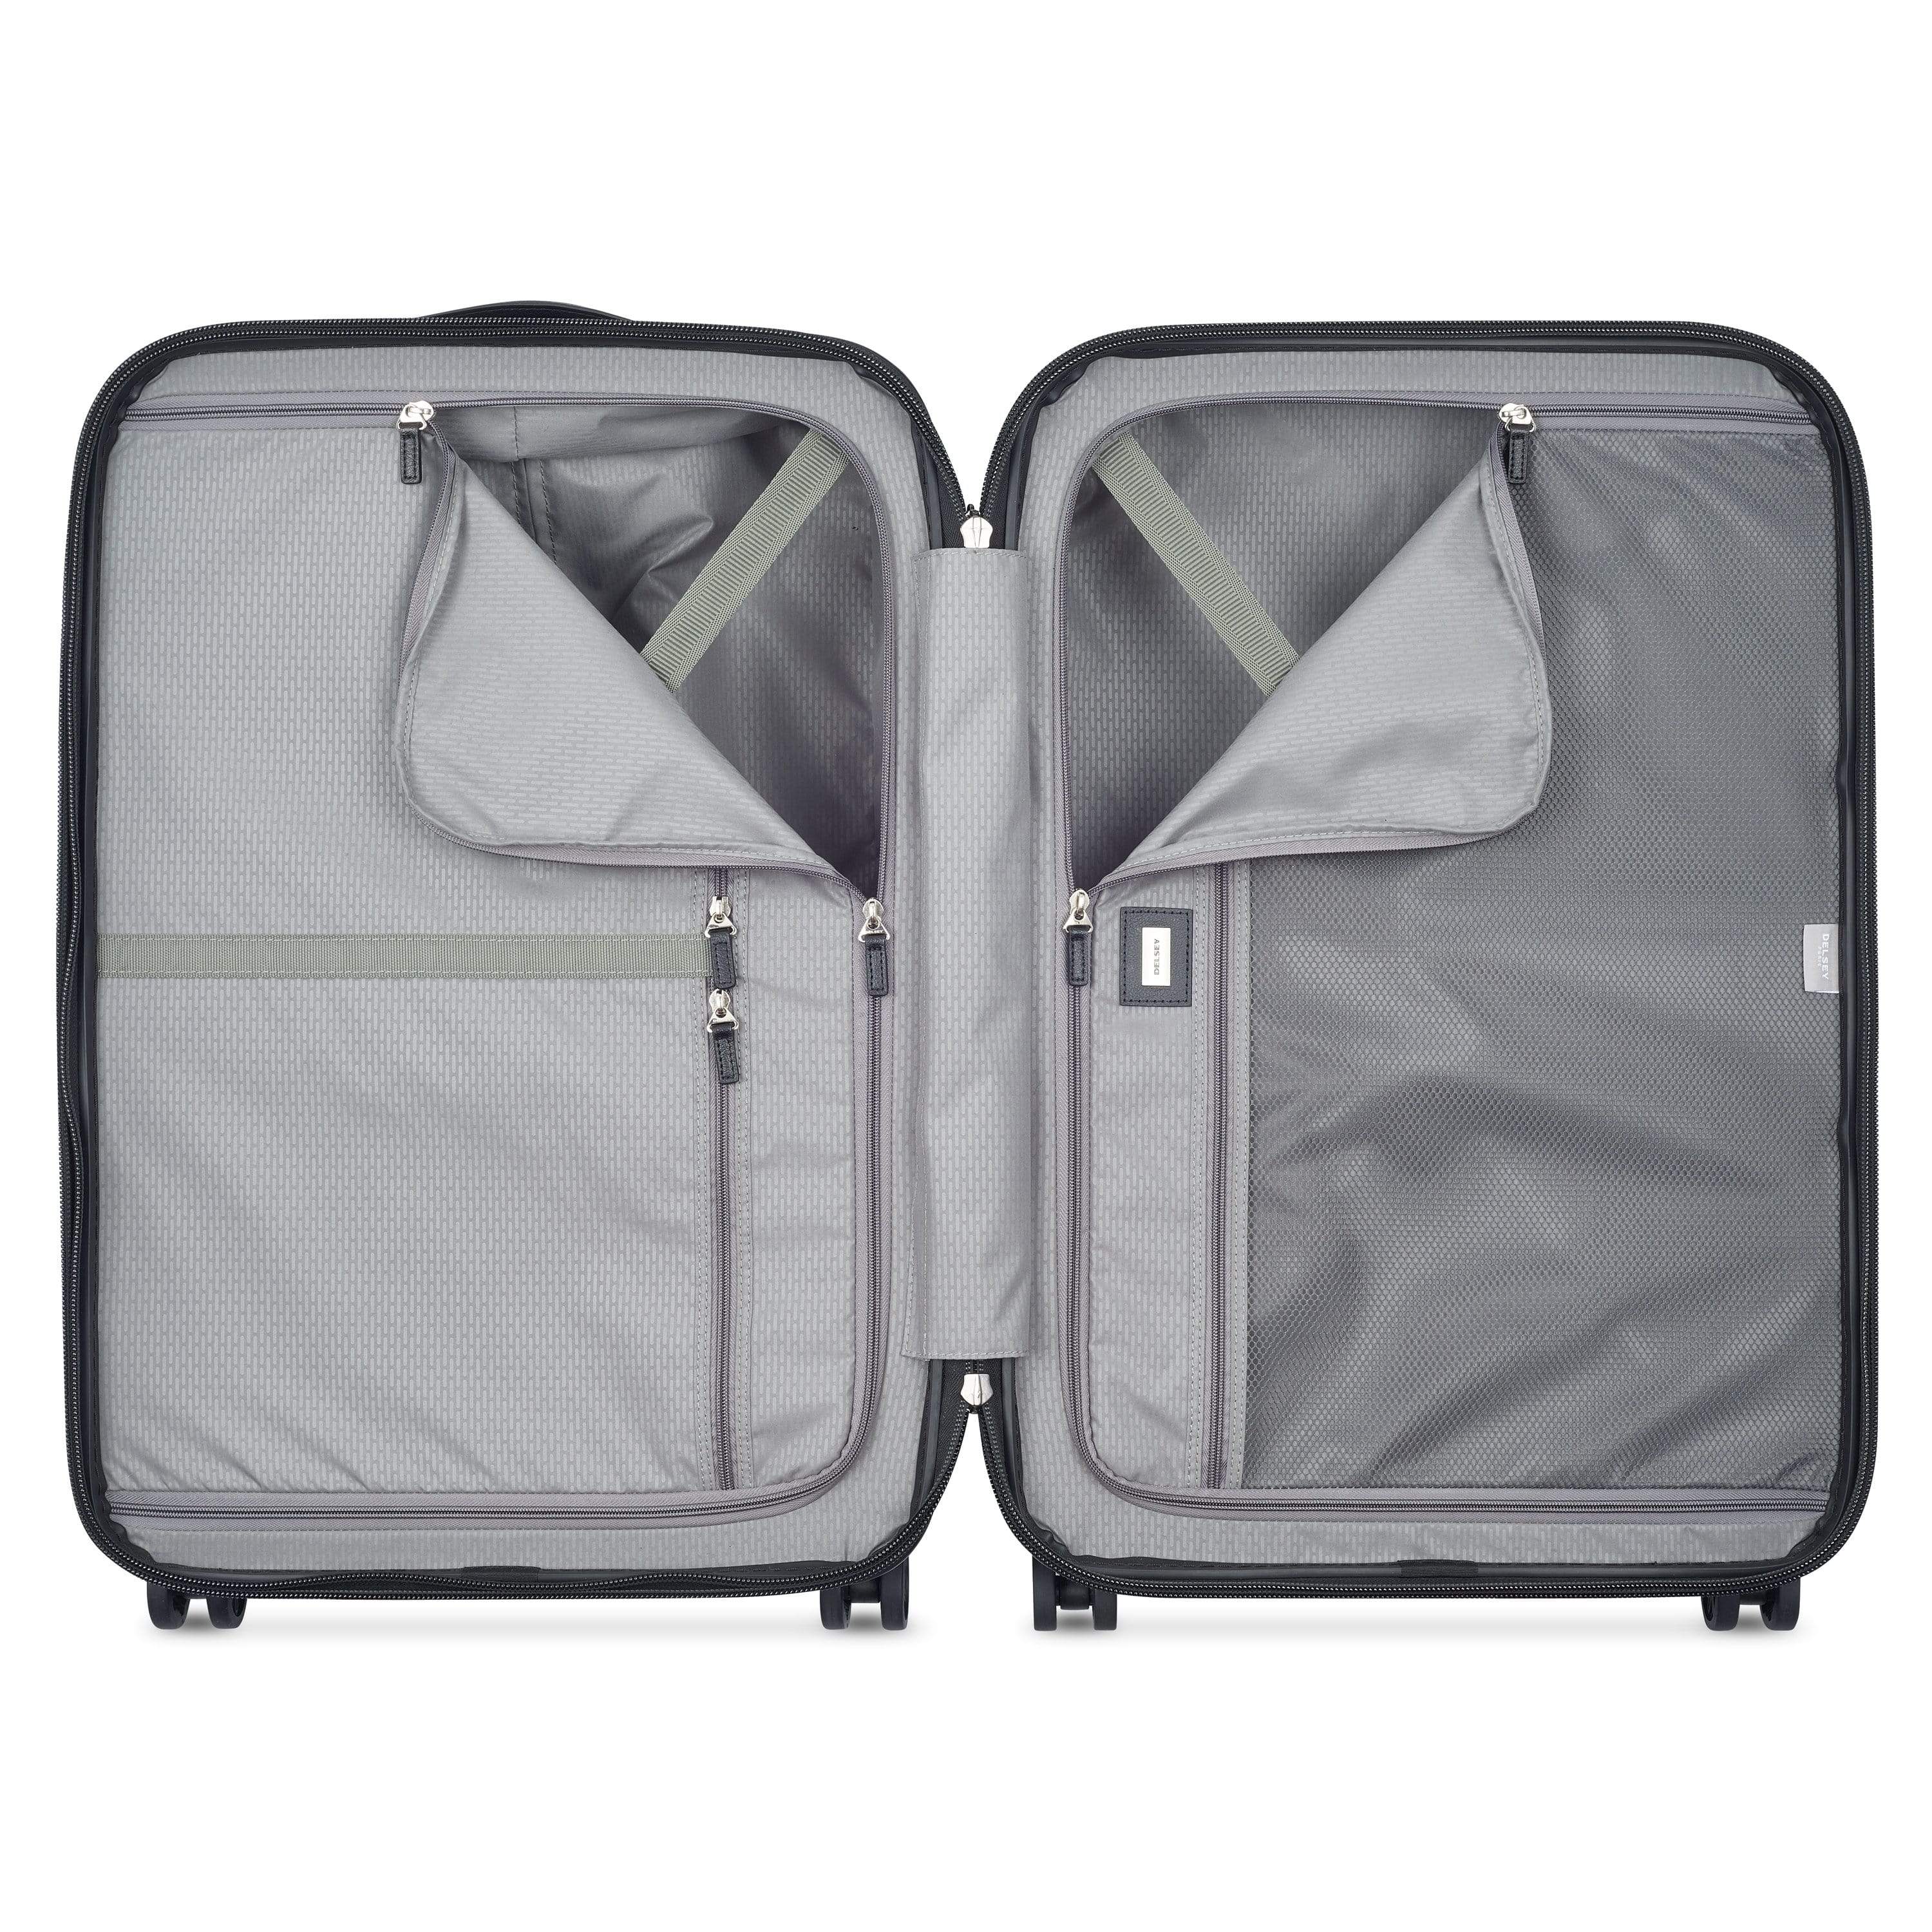 Delsey Chatelet Air 67cm Hardcase 4 Double Wheel Check-In Luggage Trolley Black - 00167281000